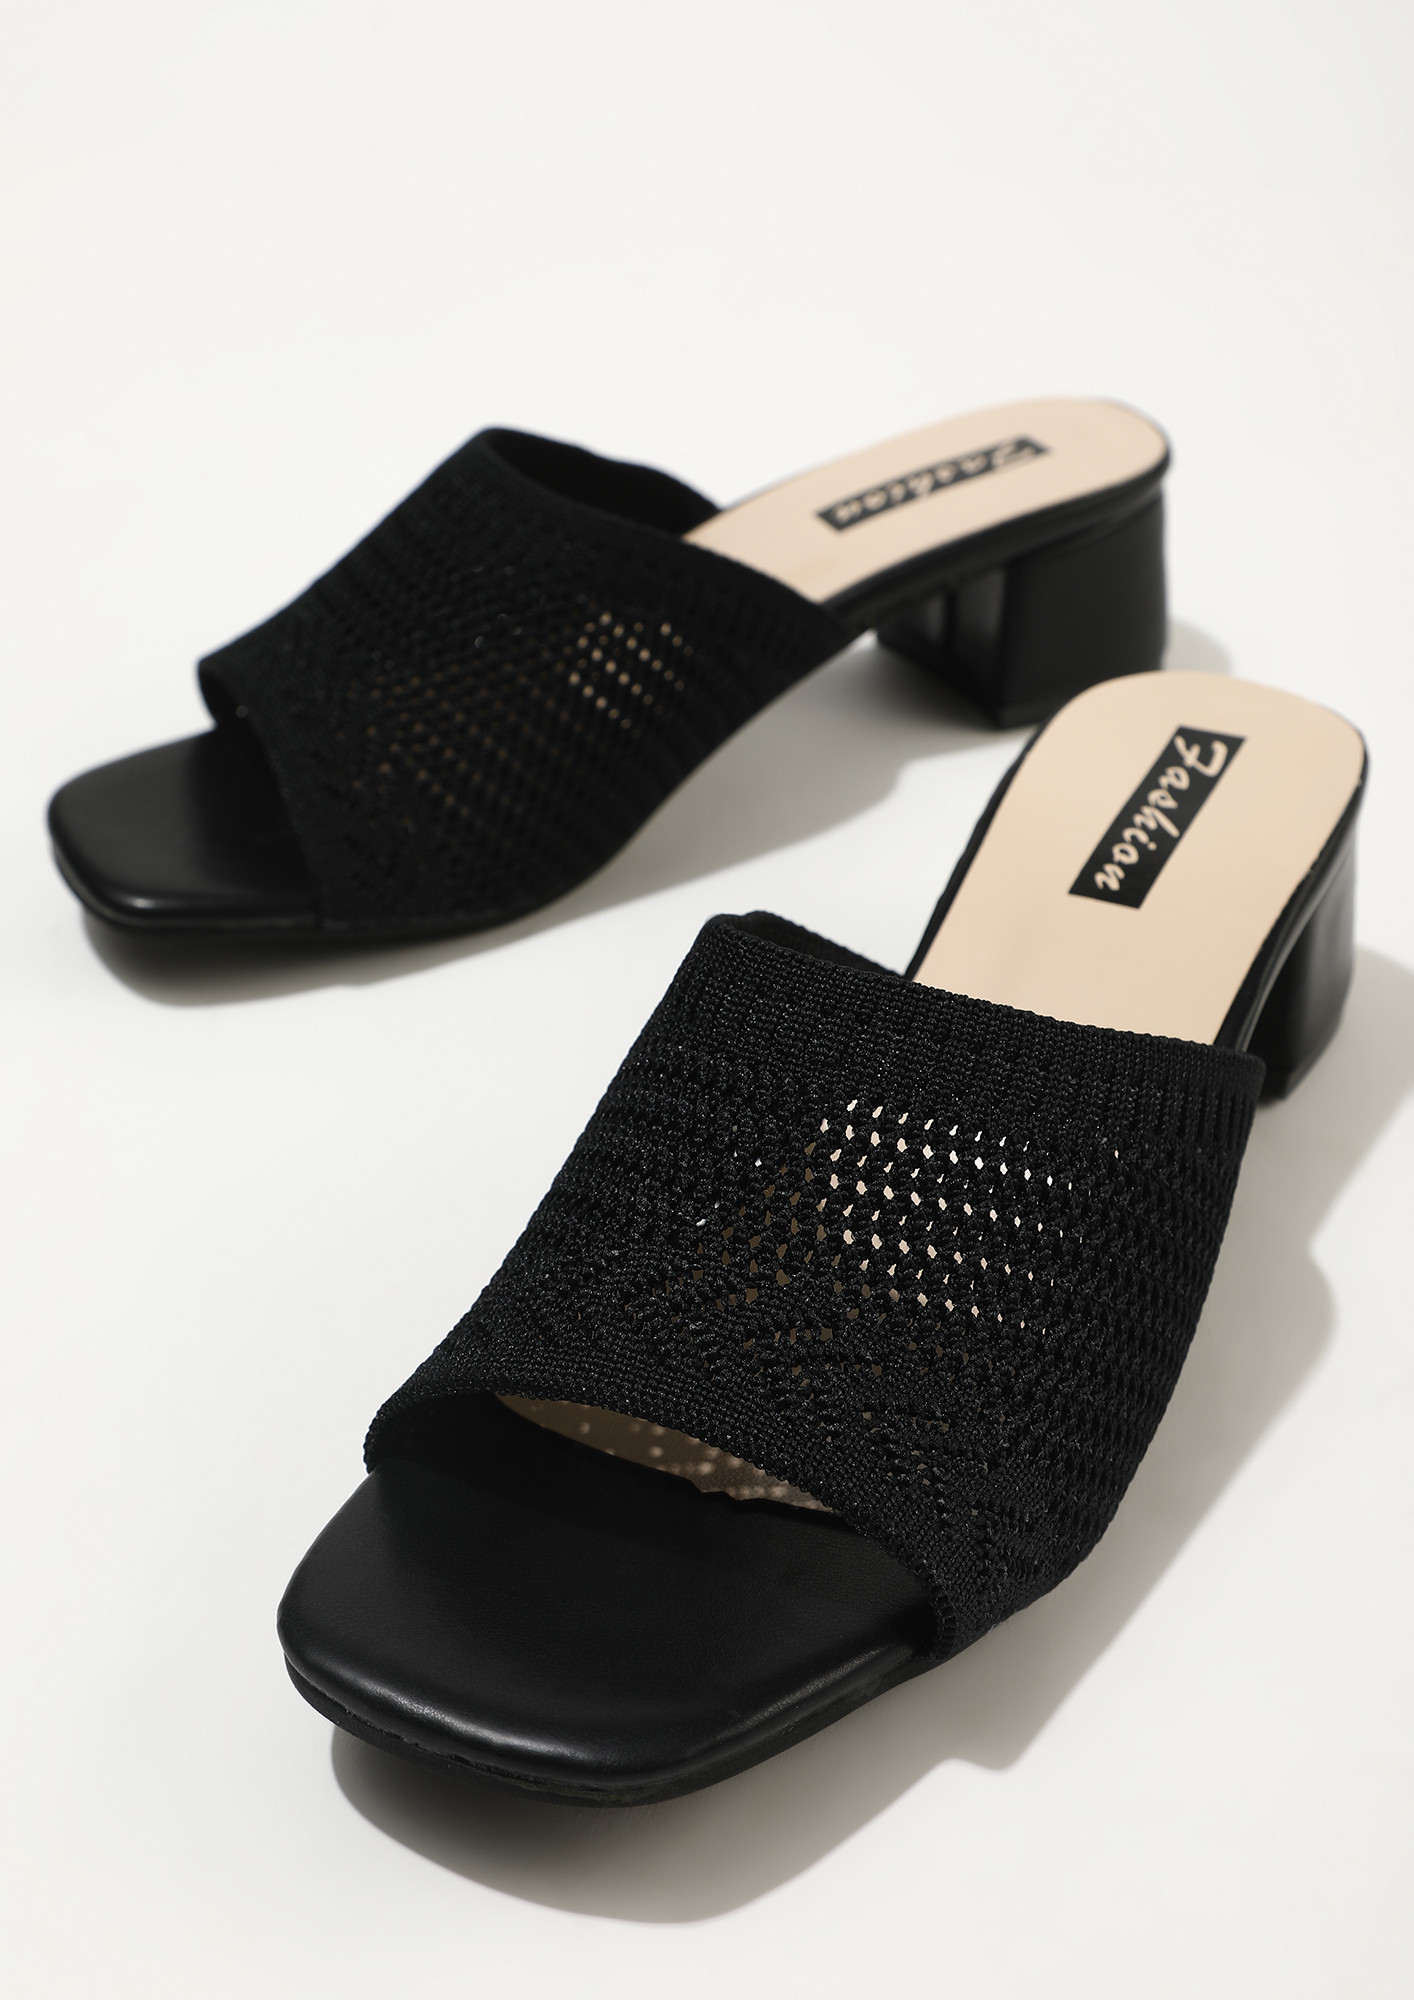 WITH A FEMININE TOUCH BLACK HEELED MULES